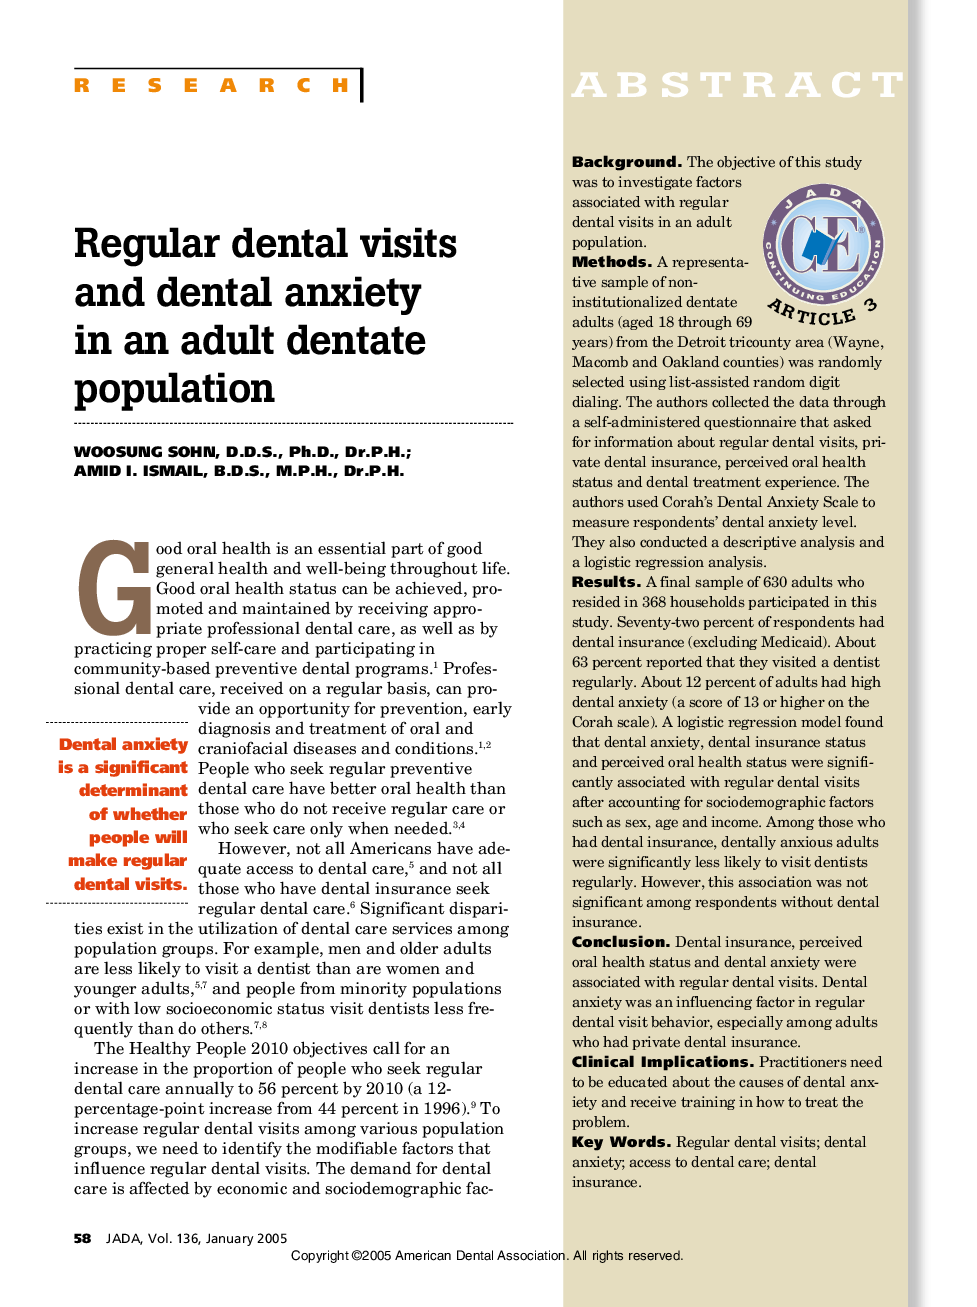 Regular dental visits and dental anxiety in an adult dentate population